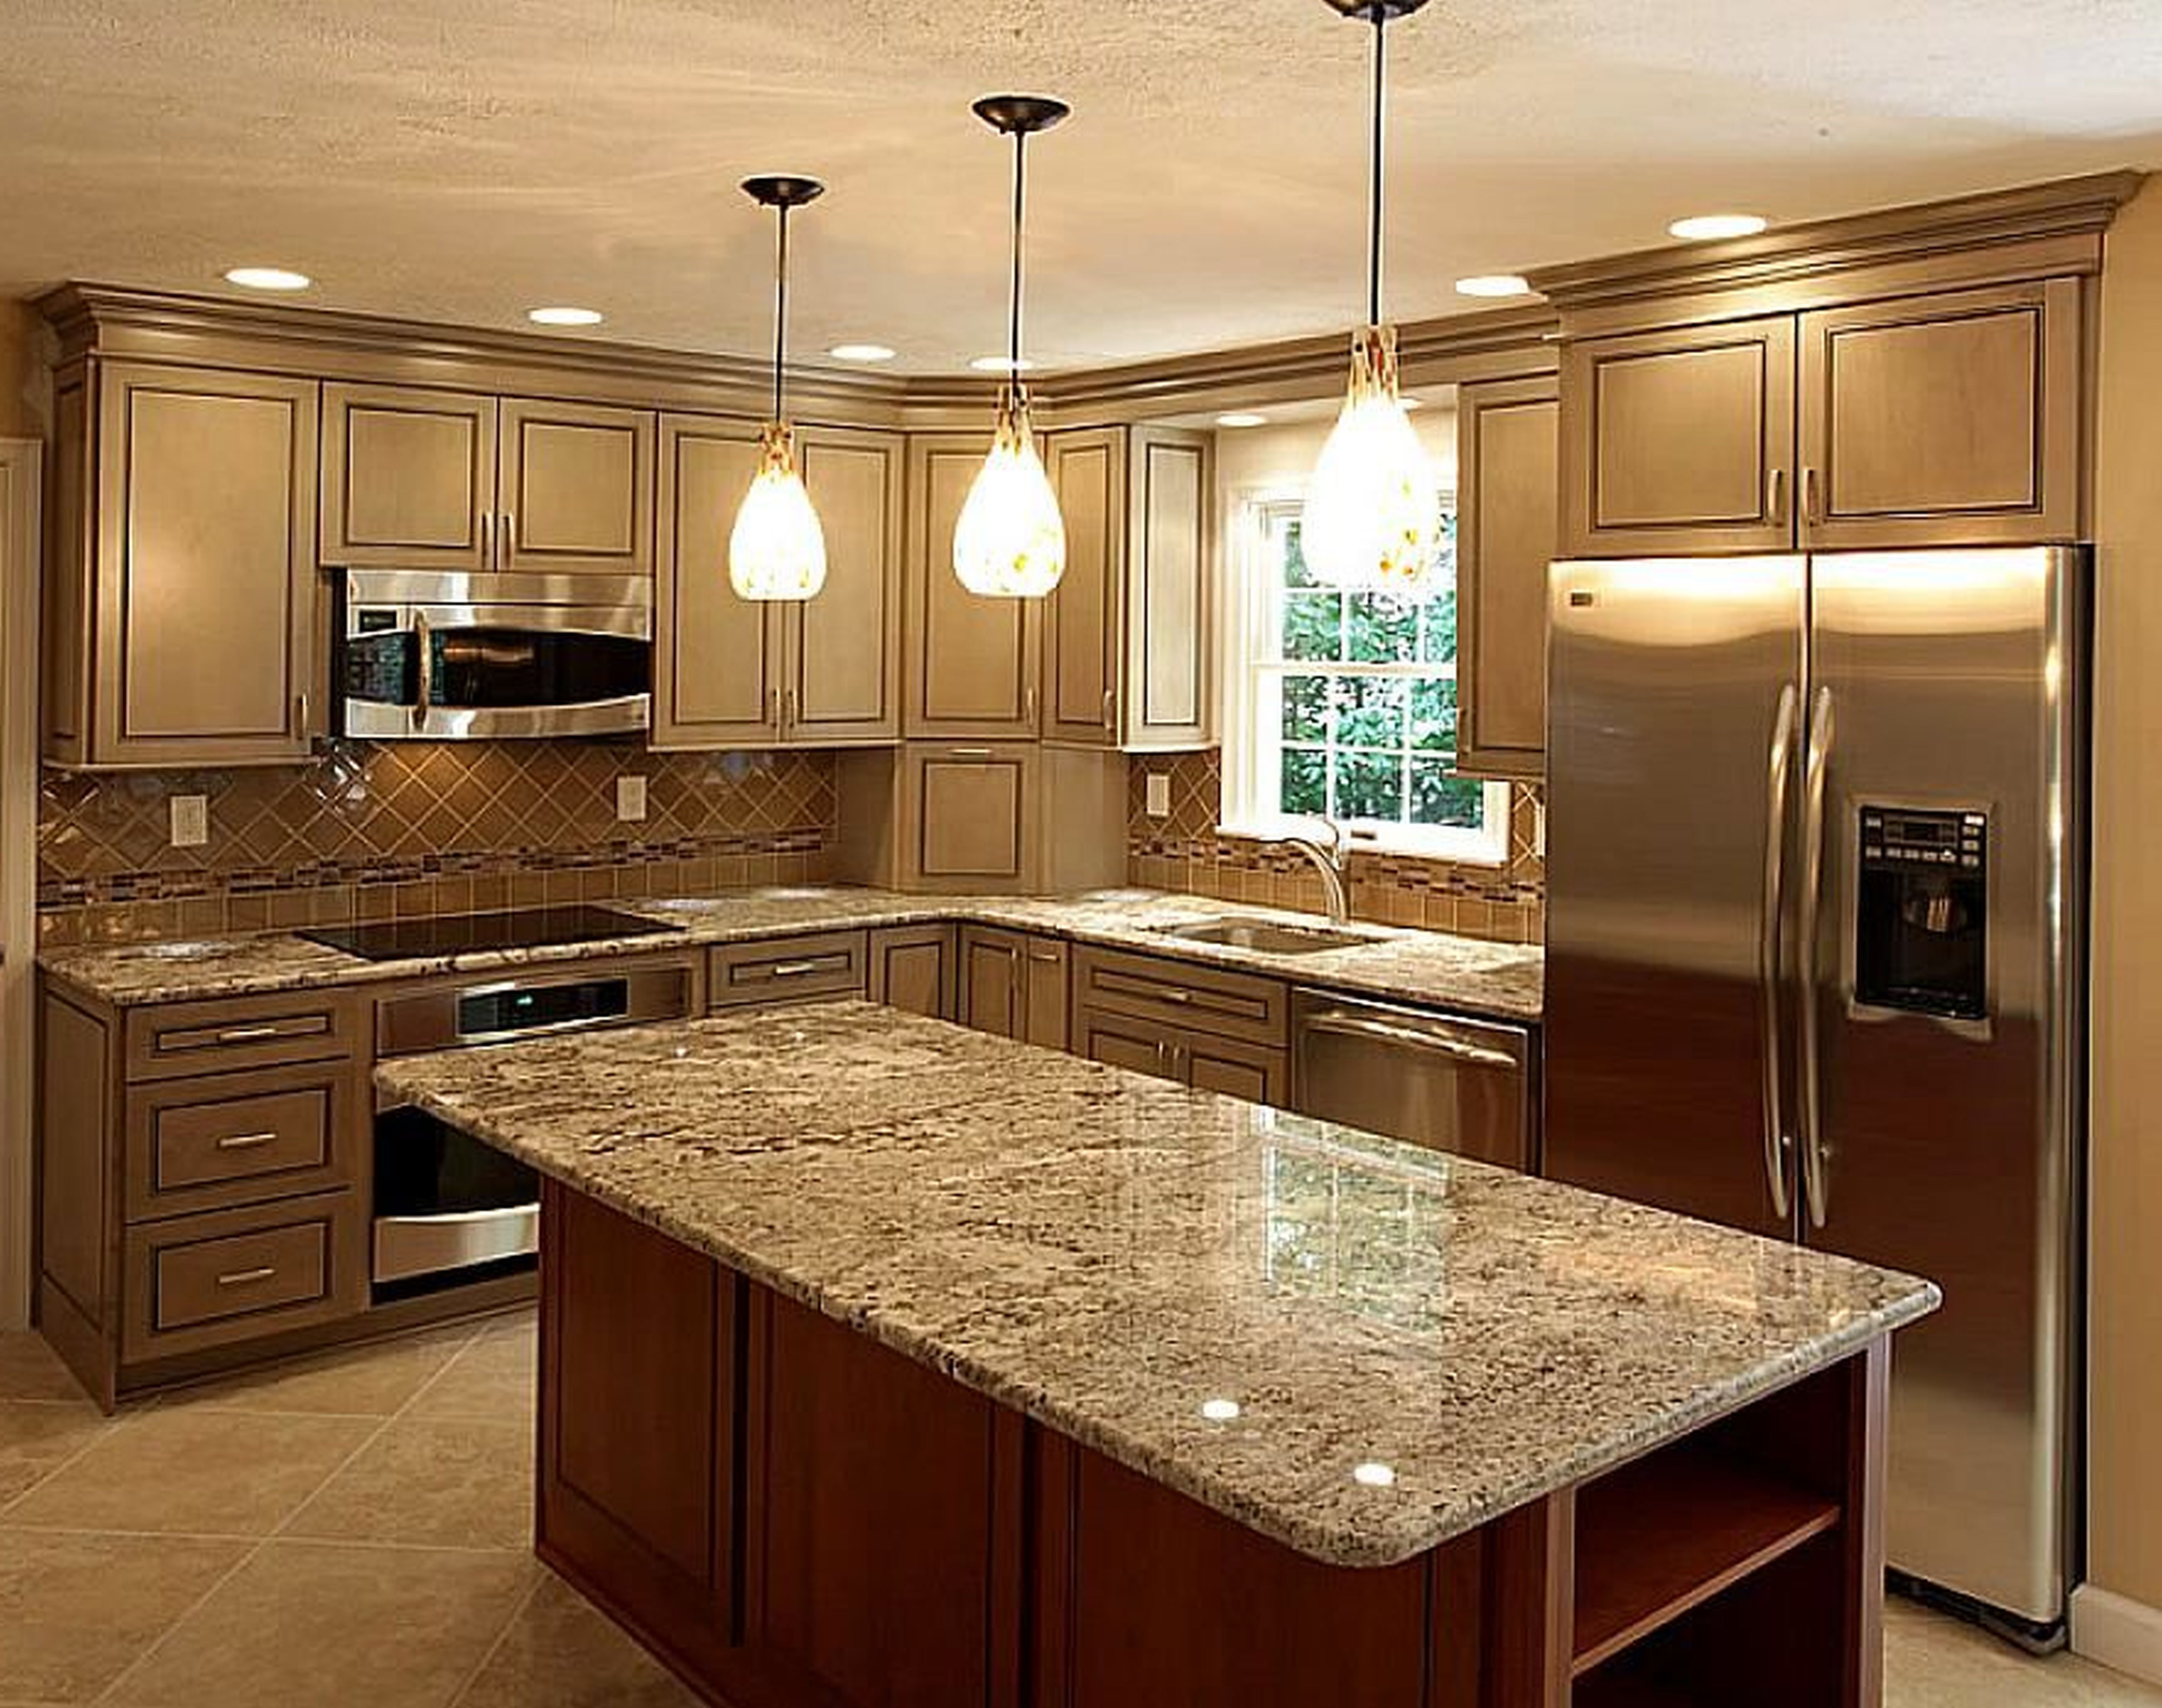 Types Of Kitchen Countertops Pros And Cons 